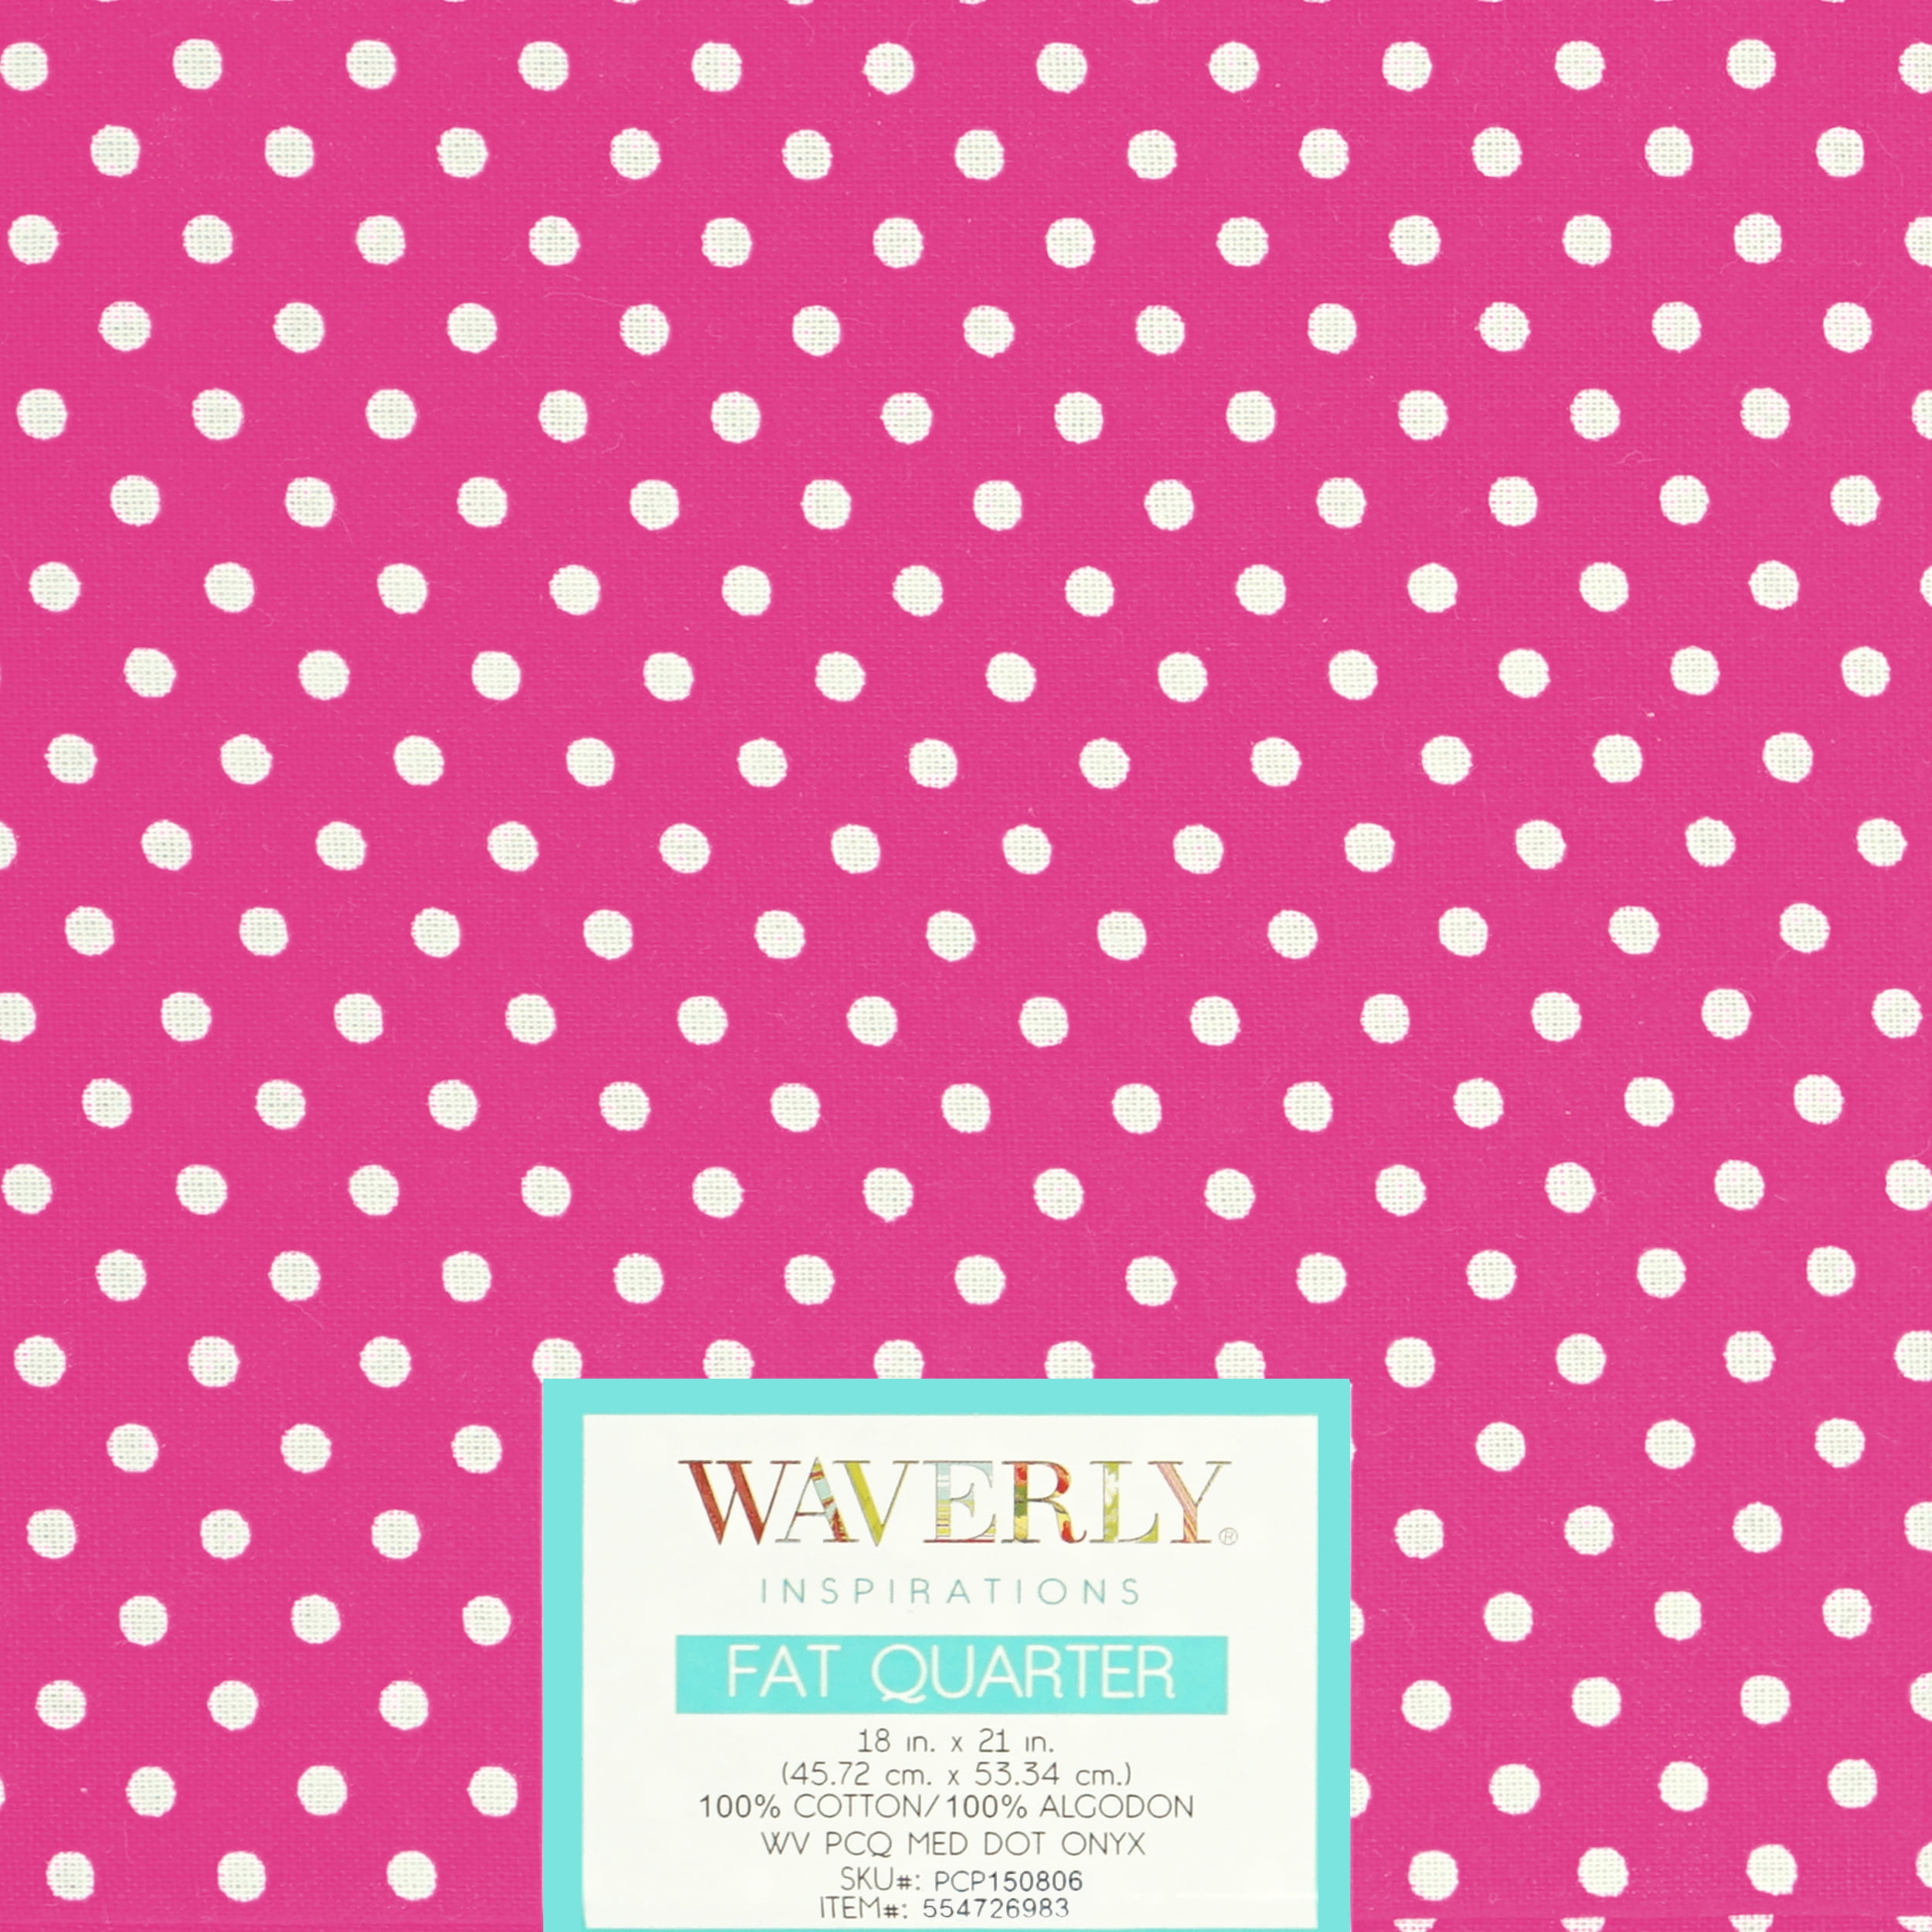 1 Yd. Waverly Big Dot Quilt Fabric Red and White Nickel Polka Dots